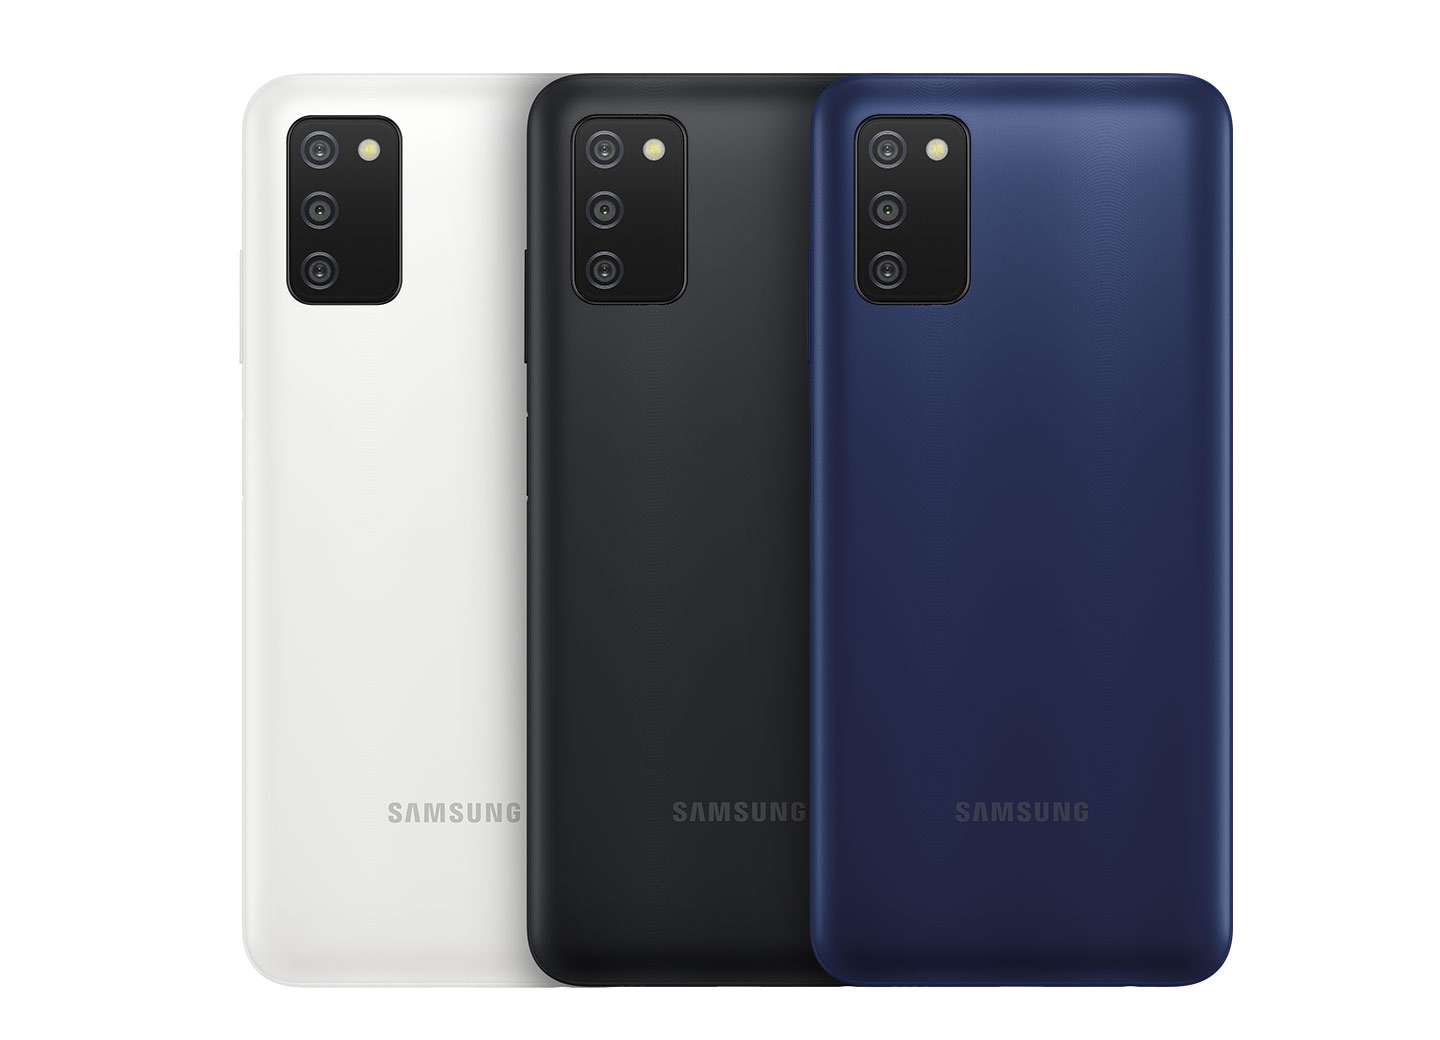 Classic back view of the device in blue along with 1 side and 1 front view to highlight modern matte finish.